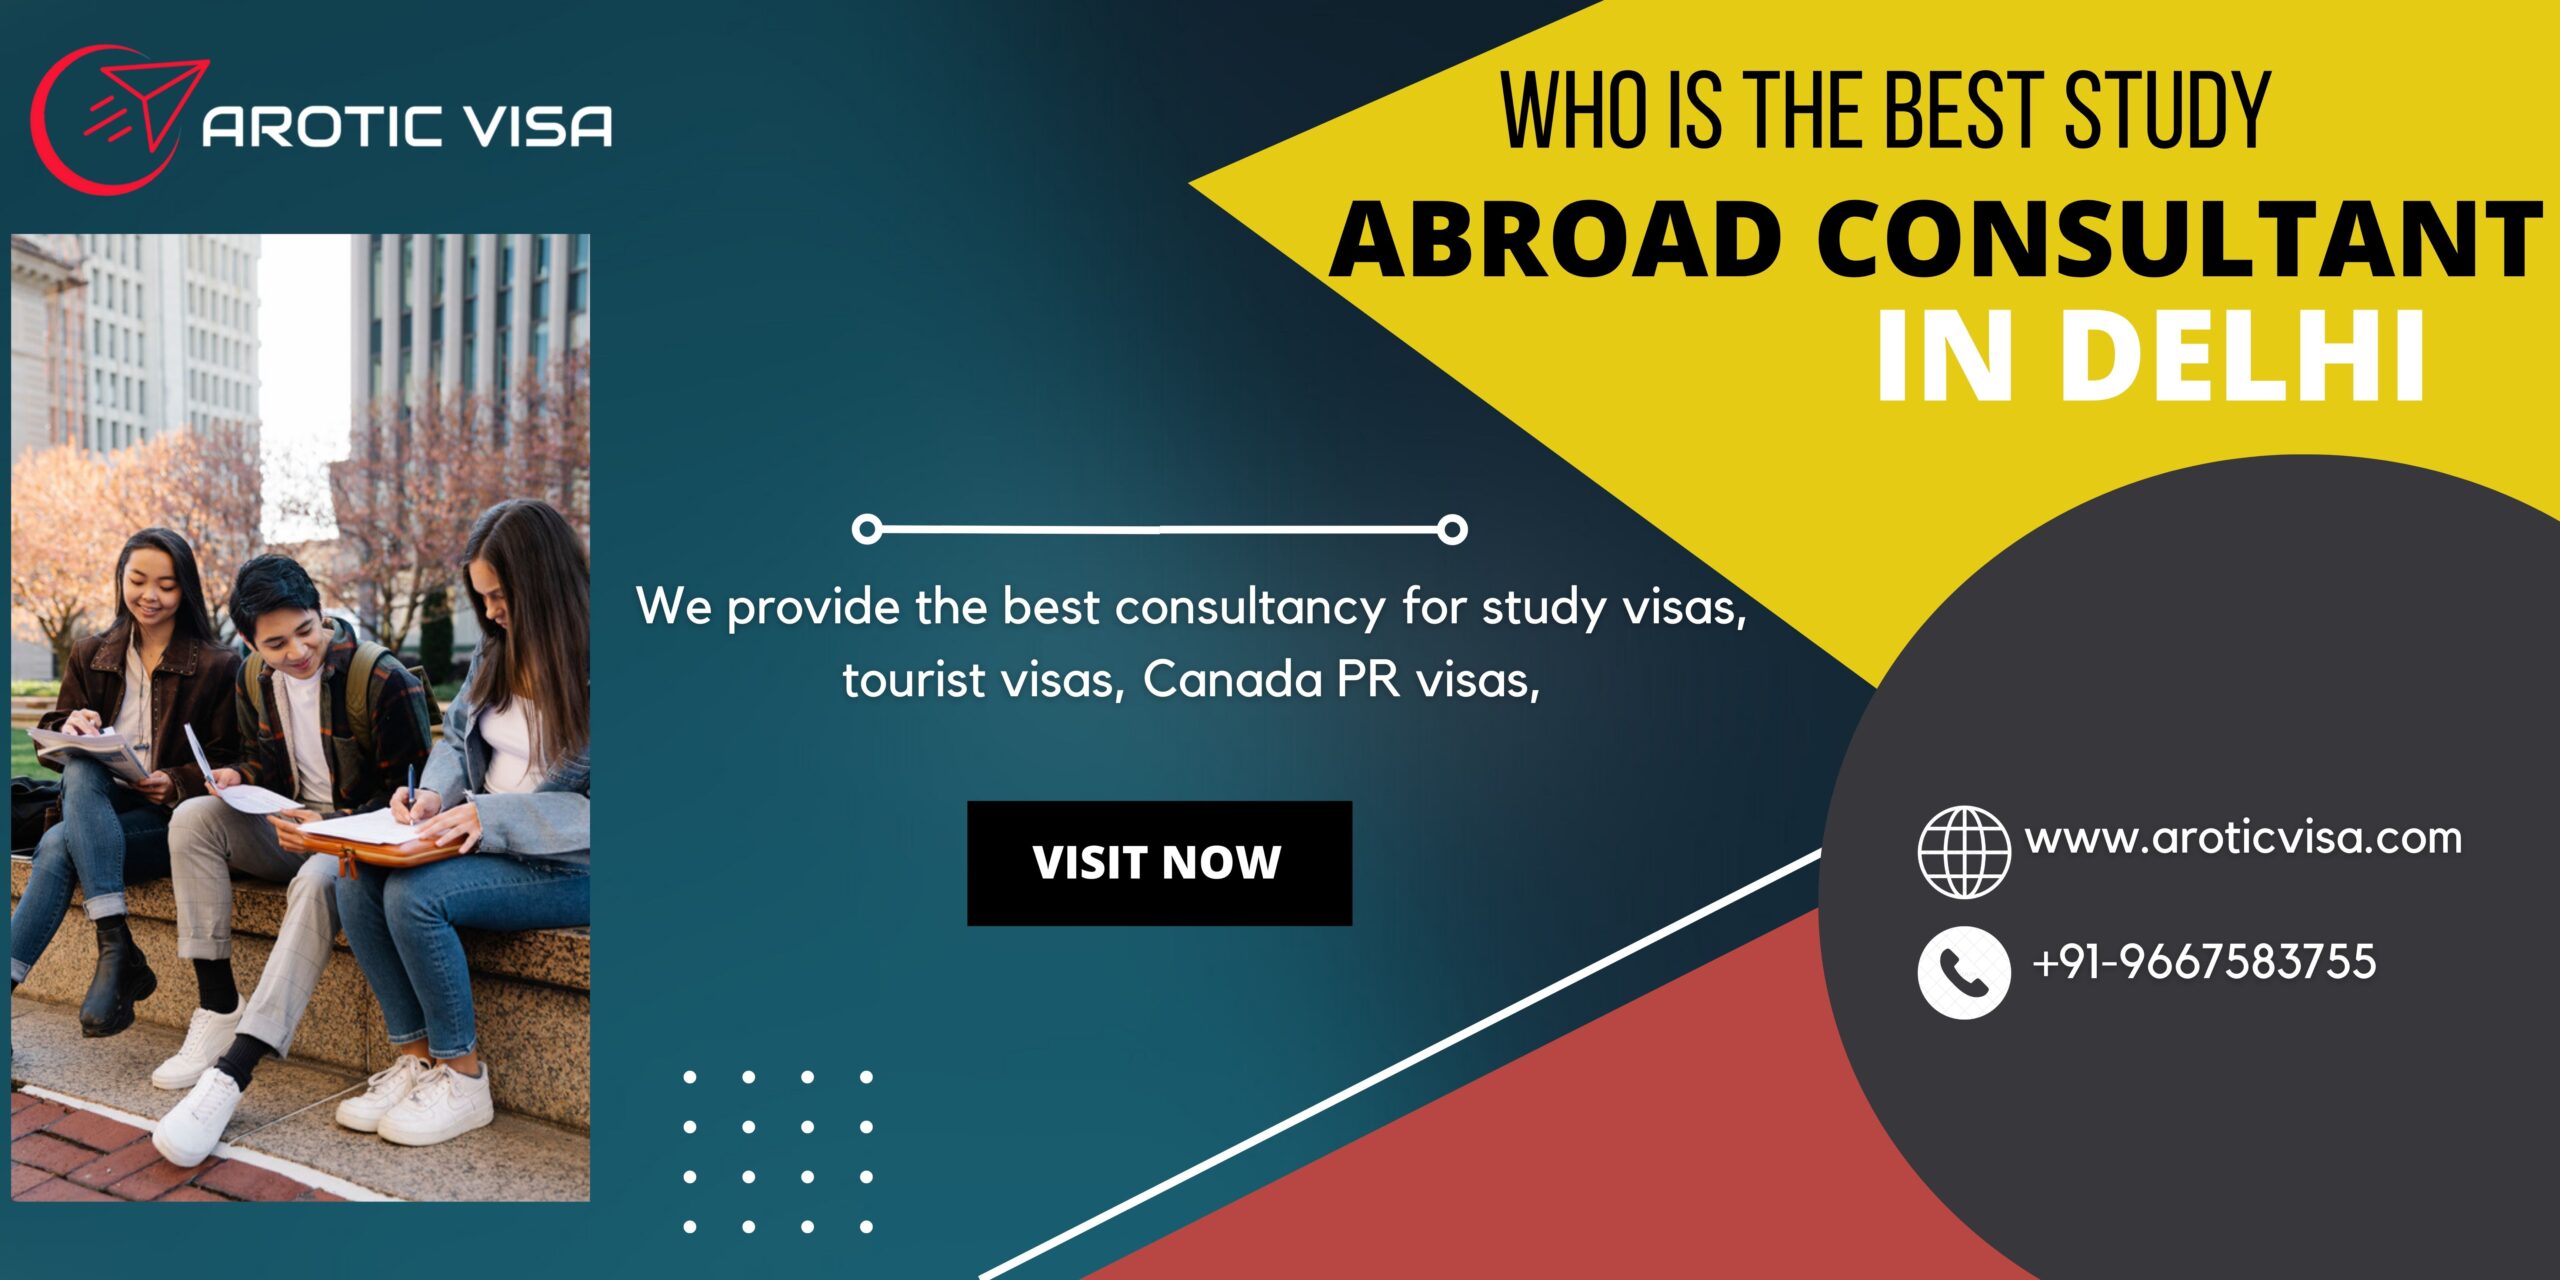 Who is the best study abroad consultant in Delhi ?